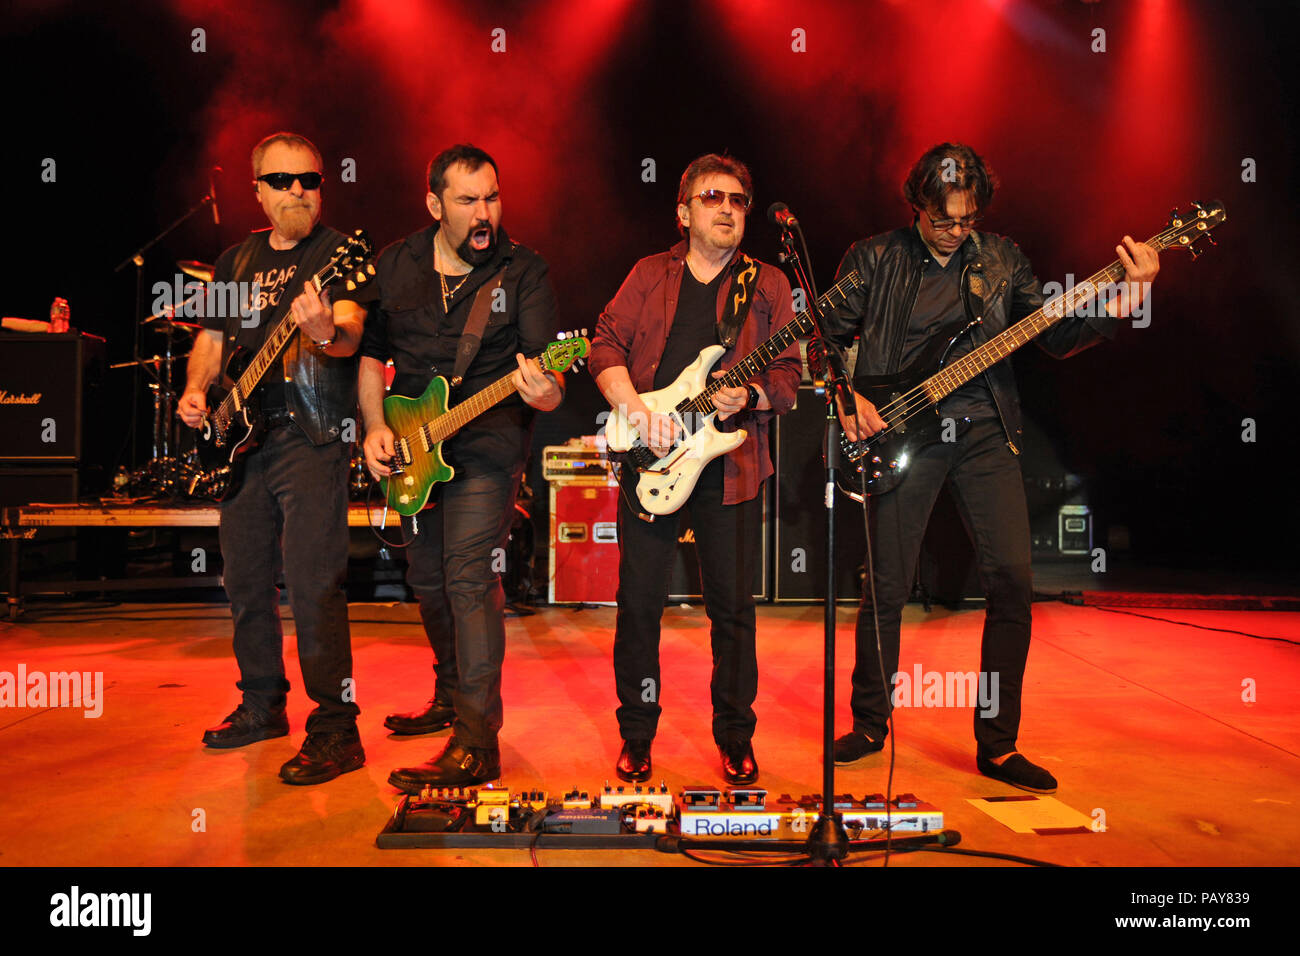 POMPANO BEACH, FL - AUGUST 15: Eric Bloom, Jules Radino and Donald 'Buck Dharma' Roeser of Blue Oyster Cult perform at the Pompano Beach Ampitheatre on August 15, 2015 in Pompano Beach Florida.   People:  Eric Bloom, Richie Castellano, Donald Roeser, Kasim Sulton Stock Photo